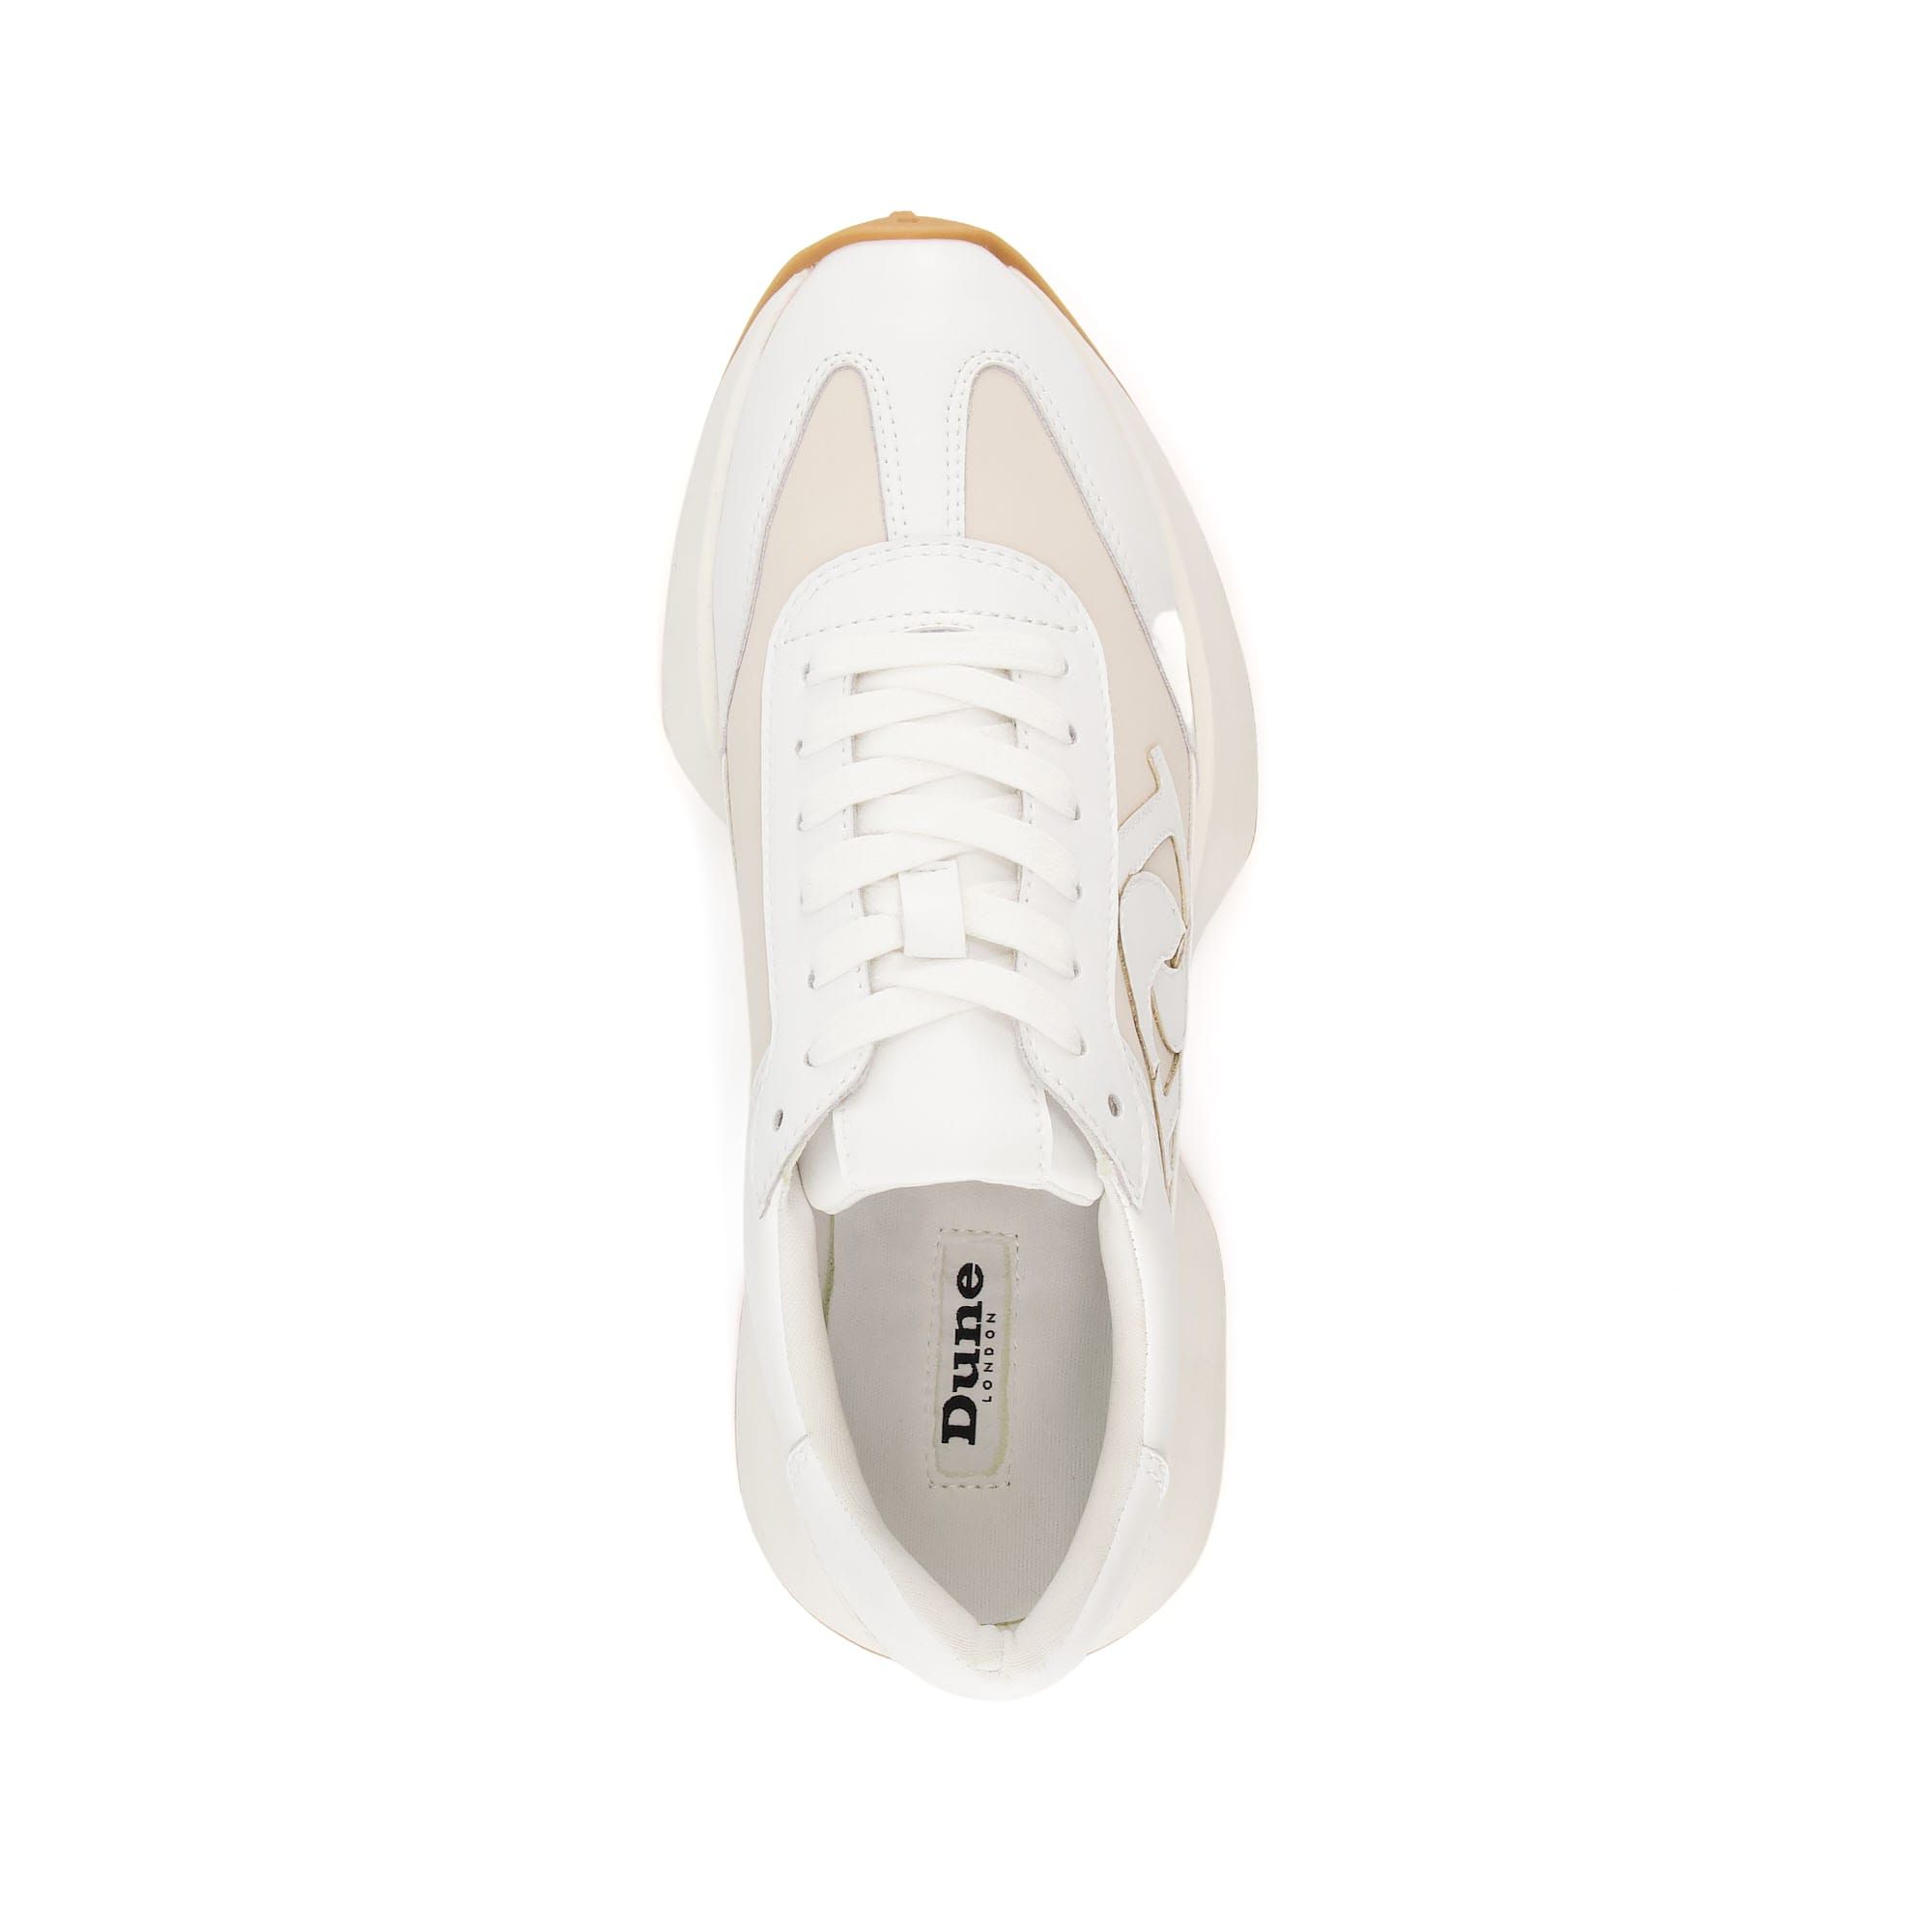 Sporty styling gets a seasonal update with our Embossed leather trainers. Comfortable and stylish, they feature our signature embossed monogram branding at the sides, whilst resting on a chunky sole.